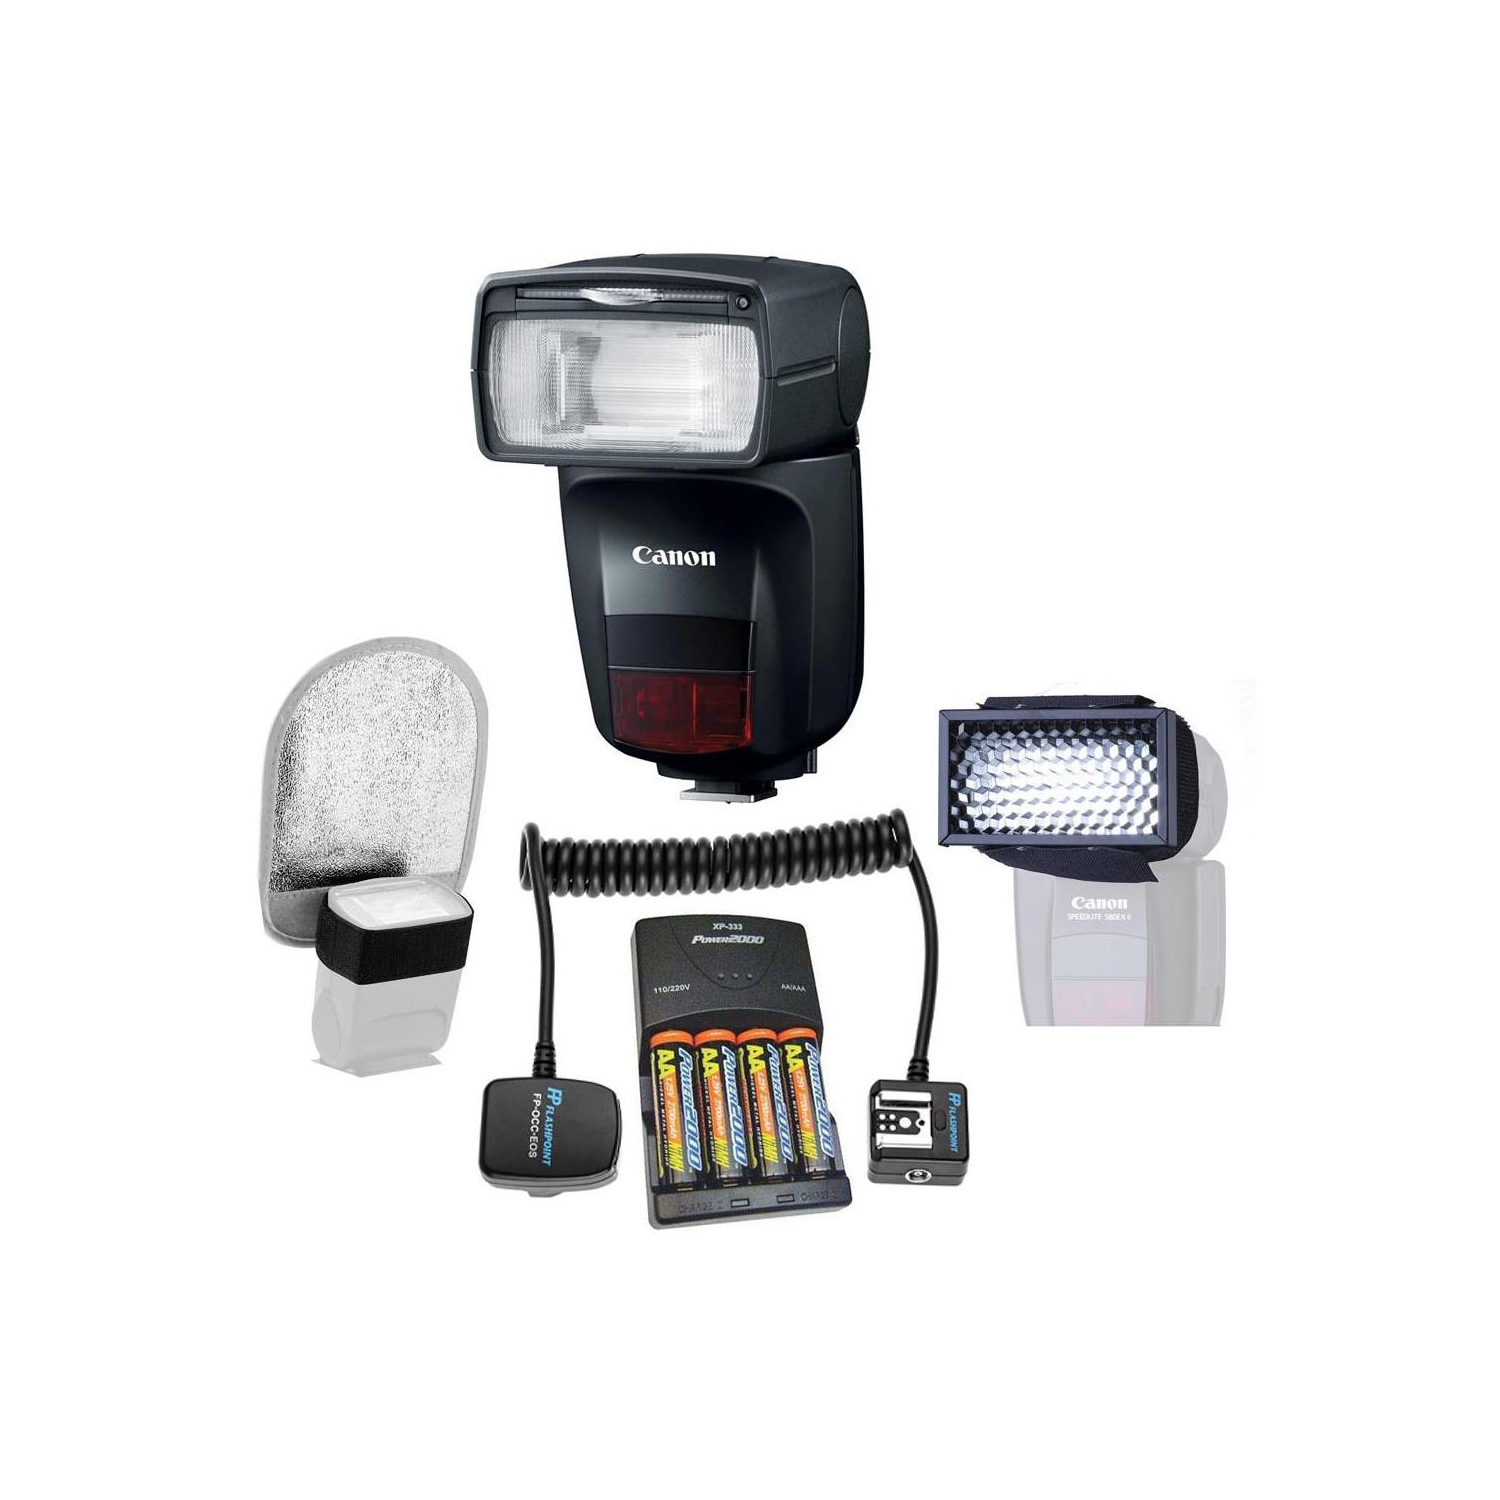 Canon Speedlite 470EX-AI Hot-Shoe Flash with Bounce Function And Acc Bundle - US Version w/ Seller Warranty